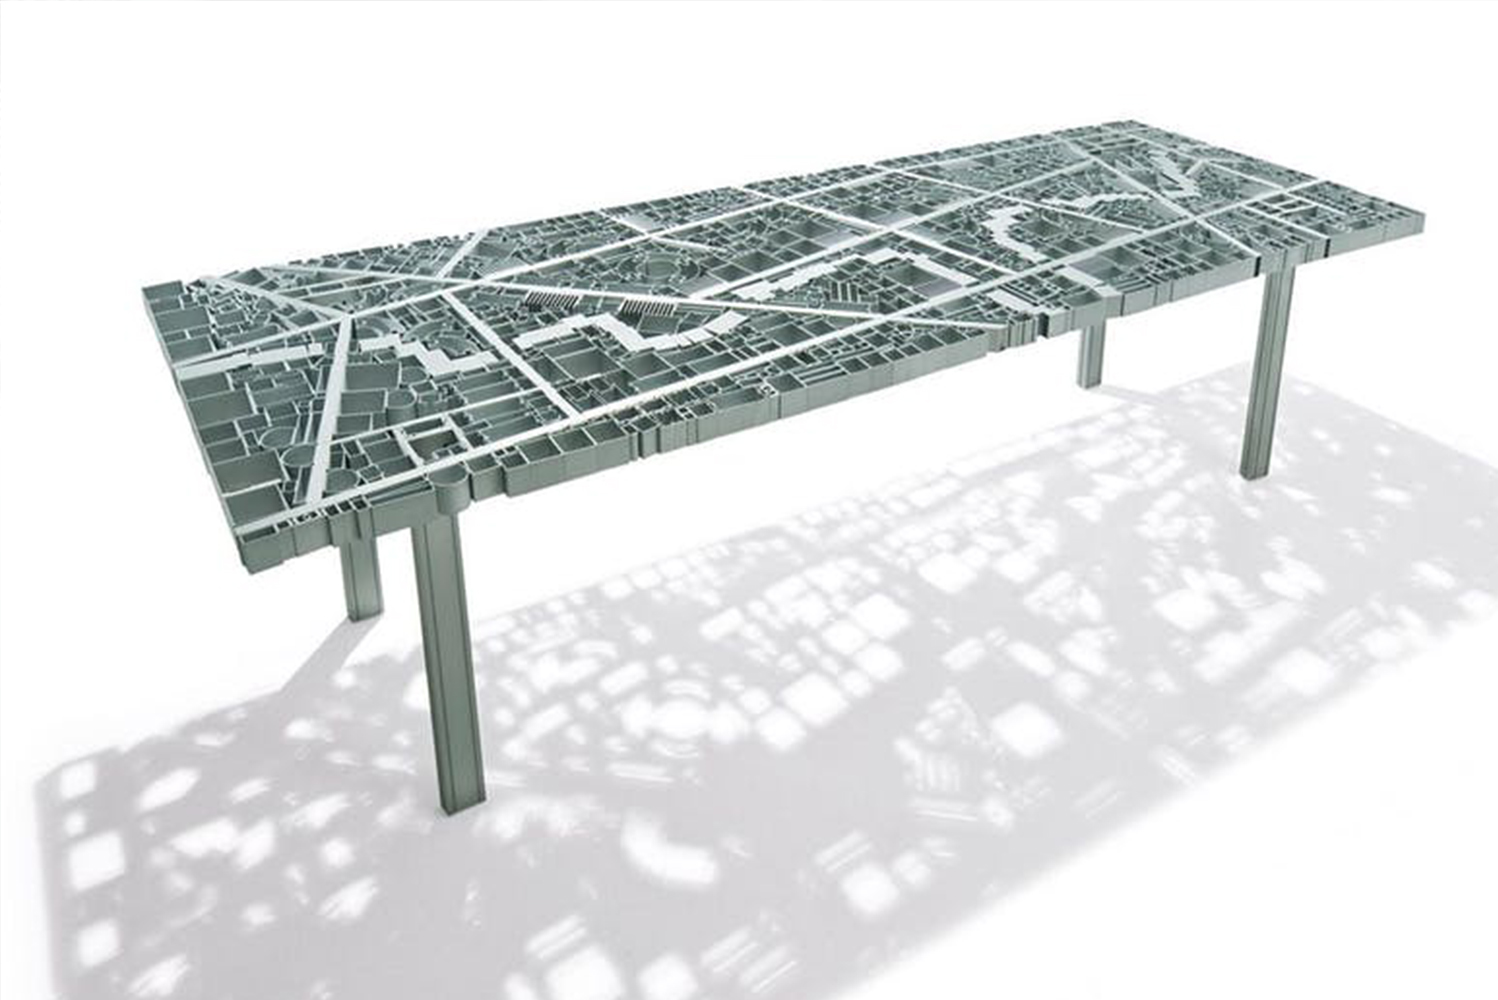 Edra launched Baghdad a manually welded anodized aluminum table in the form of a city map 